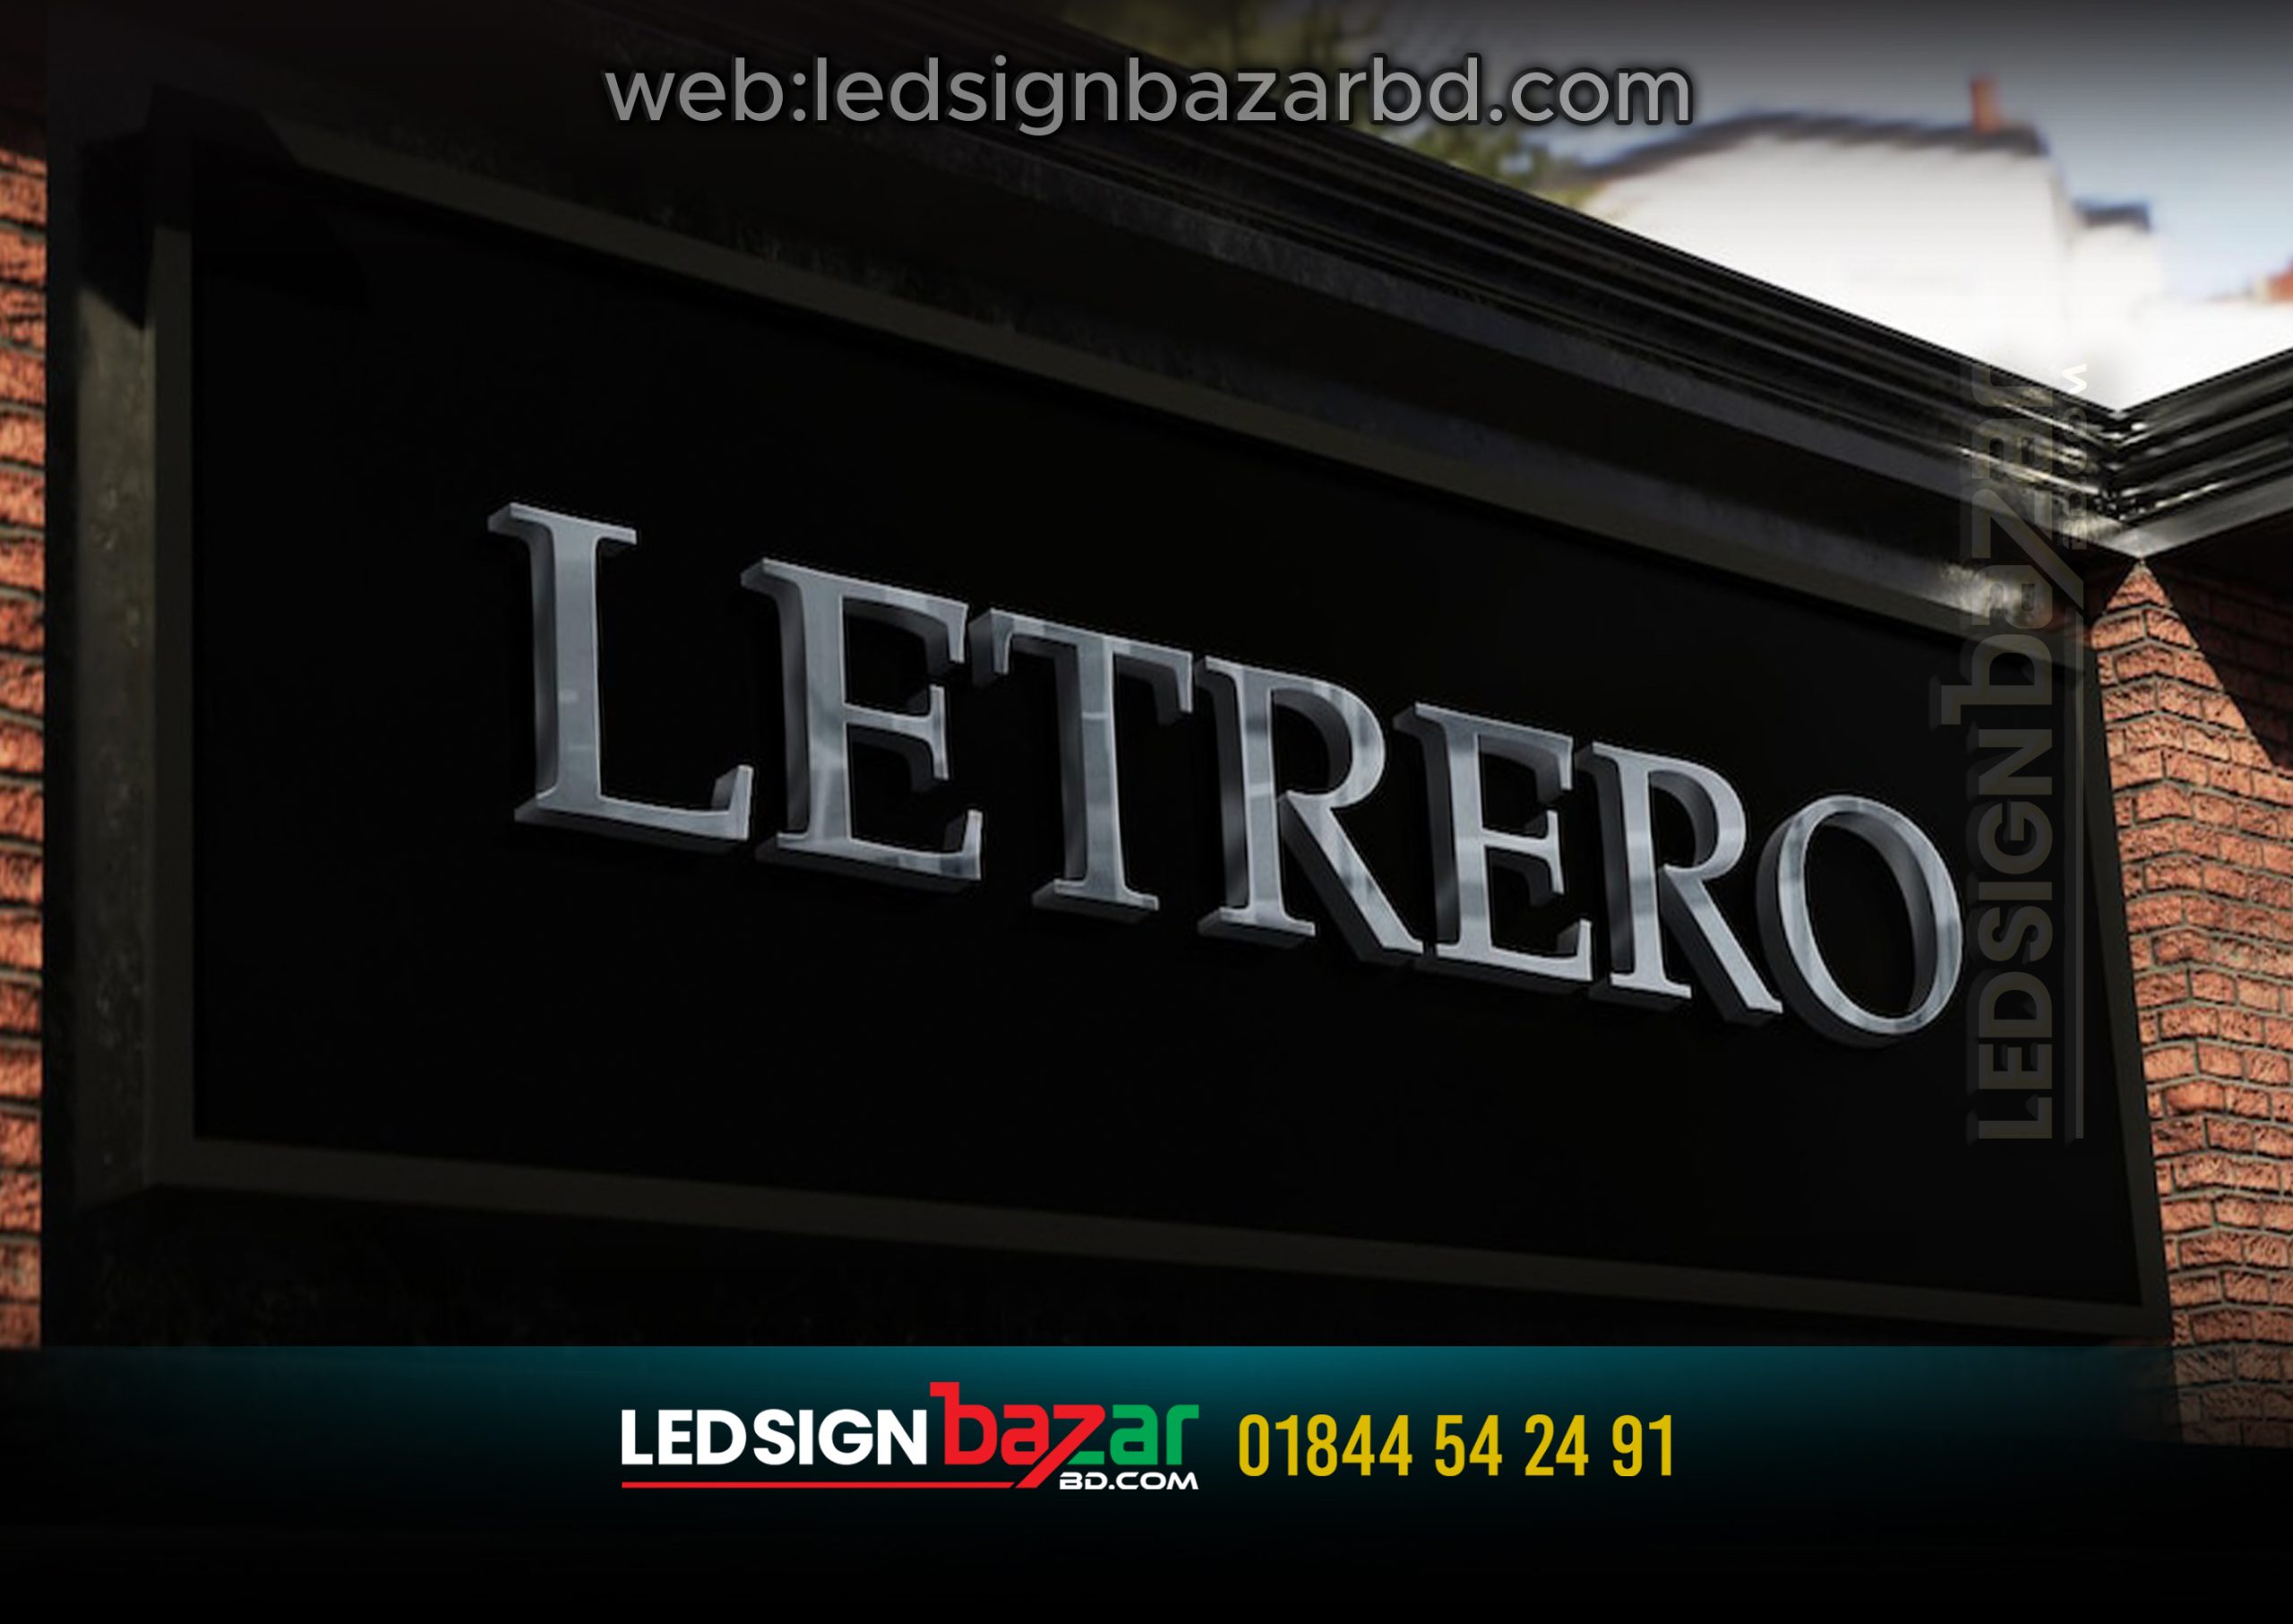 LETRERO ACRYLIC AND MIRROR LETTER SIGNAGE BD, LED SIGN BOARD BD, NEON SIGNAGE BD, BILLBOARD BD.